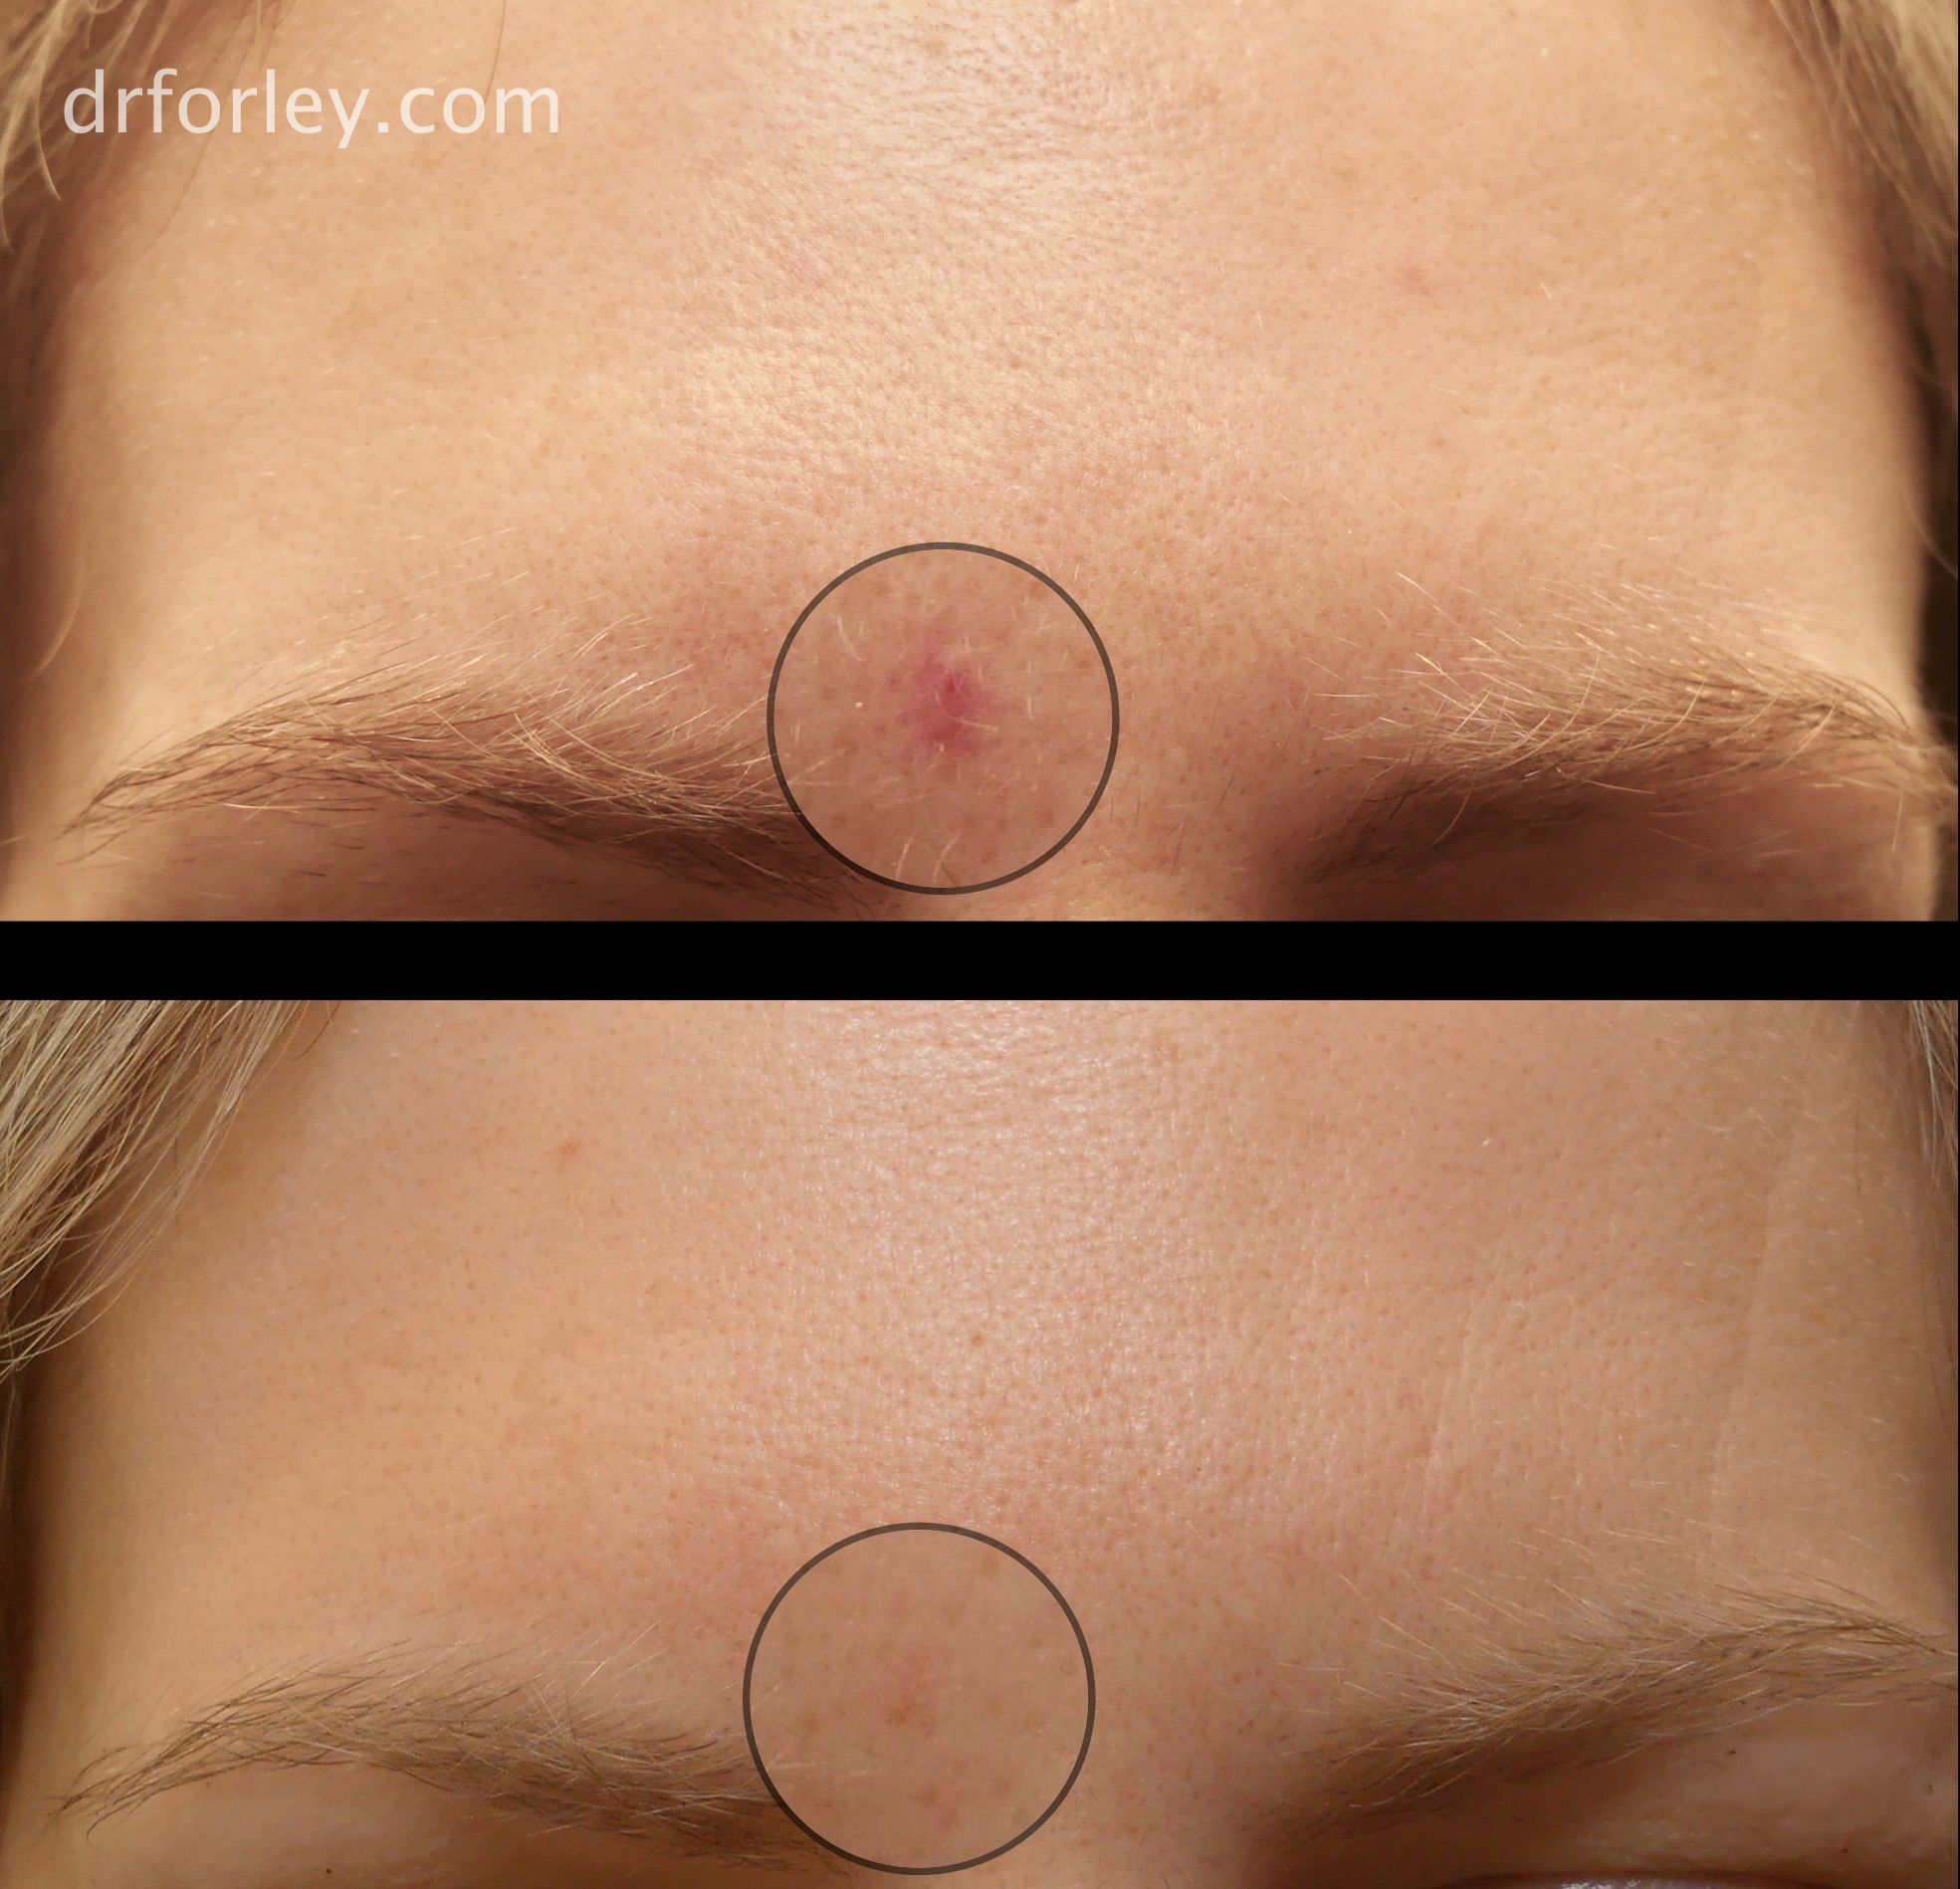 Blog - Nd:YAG LASER TREATMENT OF VASCULAR SKIN CONDITIONS Photo 